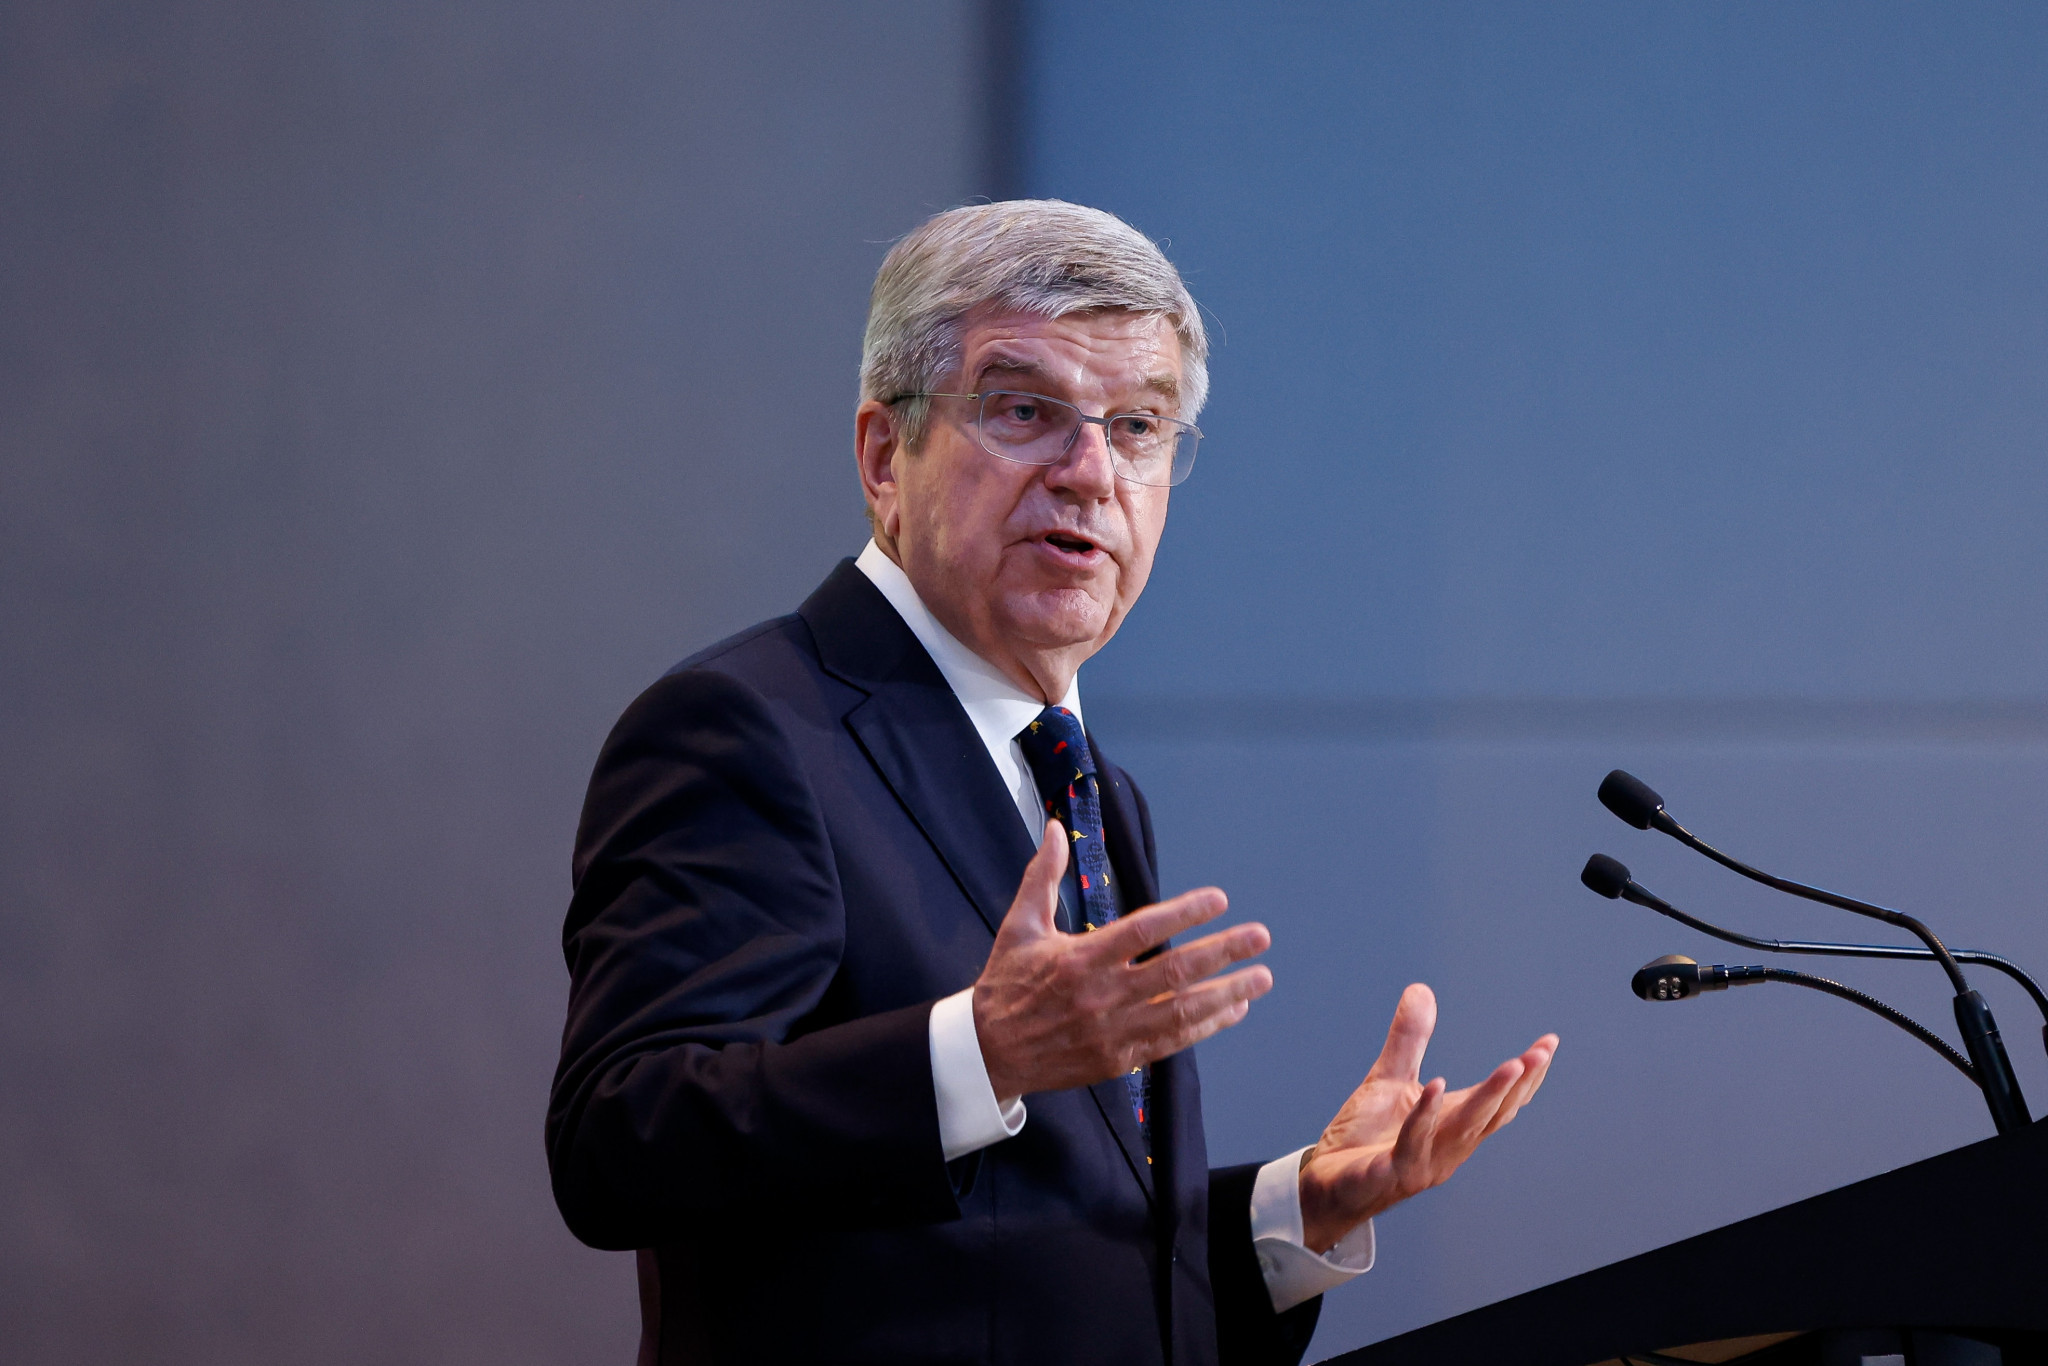 IOC President Thomas Bach is in Skopje for the EOC General Assembly ©Getty Images